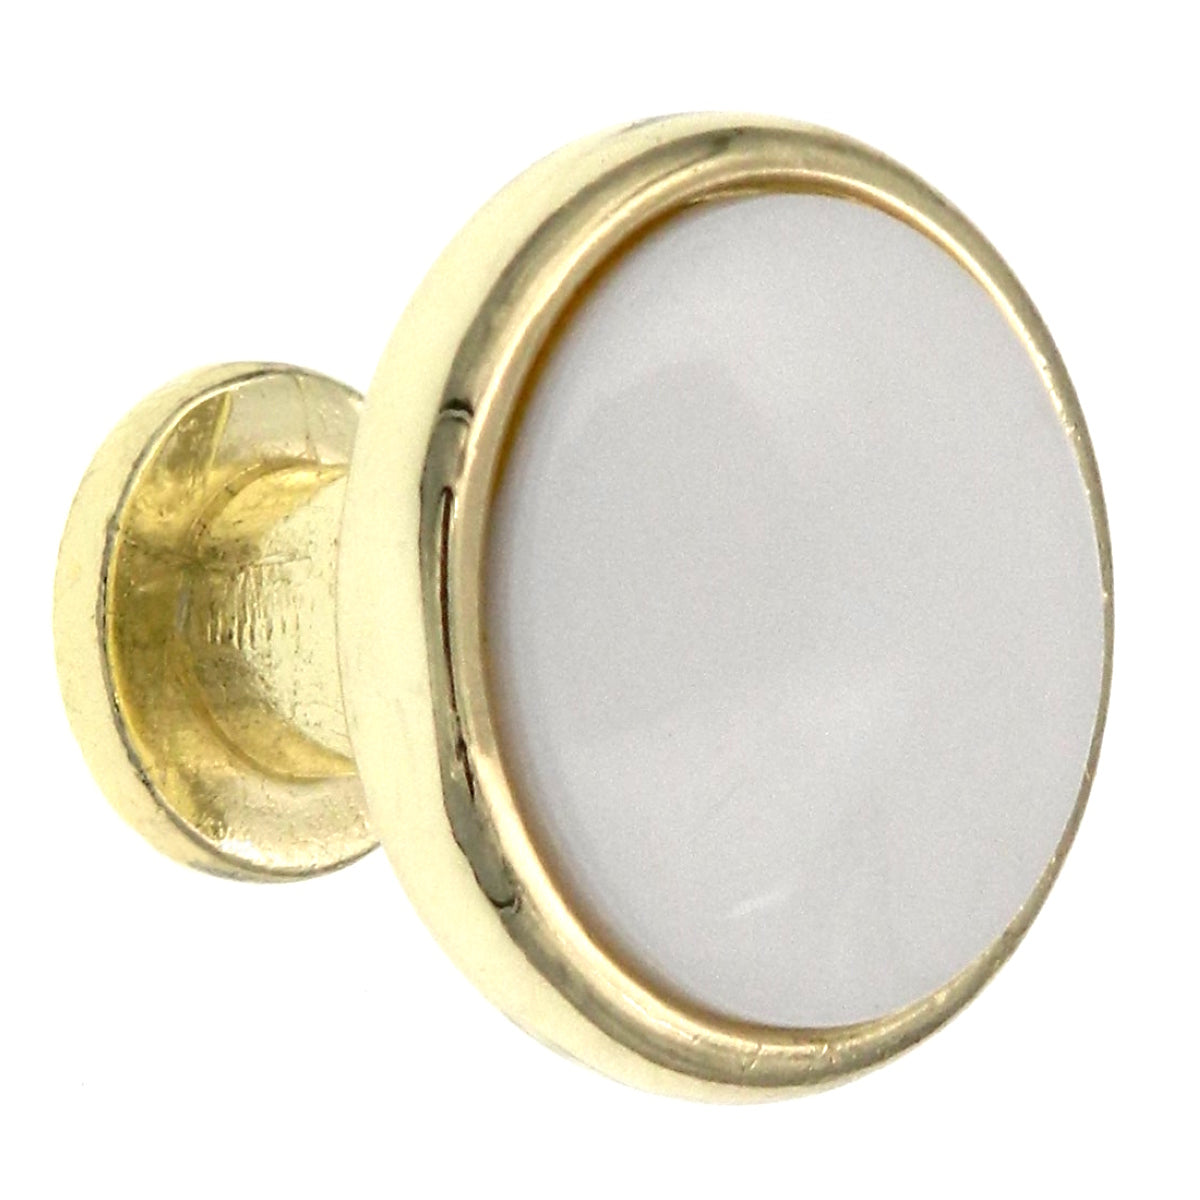 10 Pack Belwith Keeler P419-W Solid Brass, White Center 1 1/8" Cabinet Knob Pull